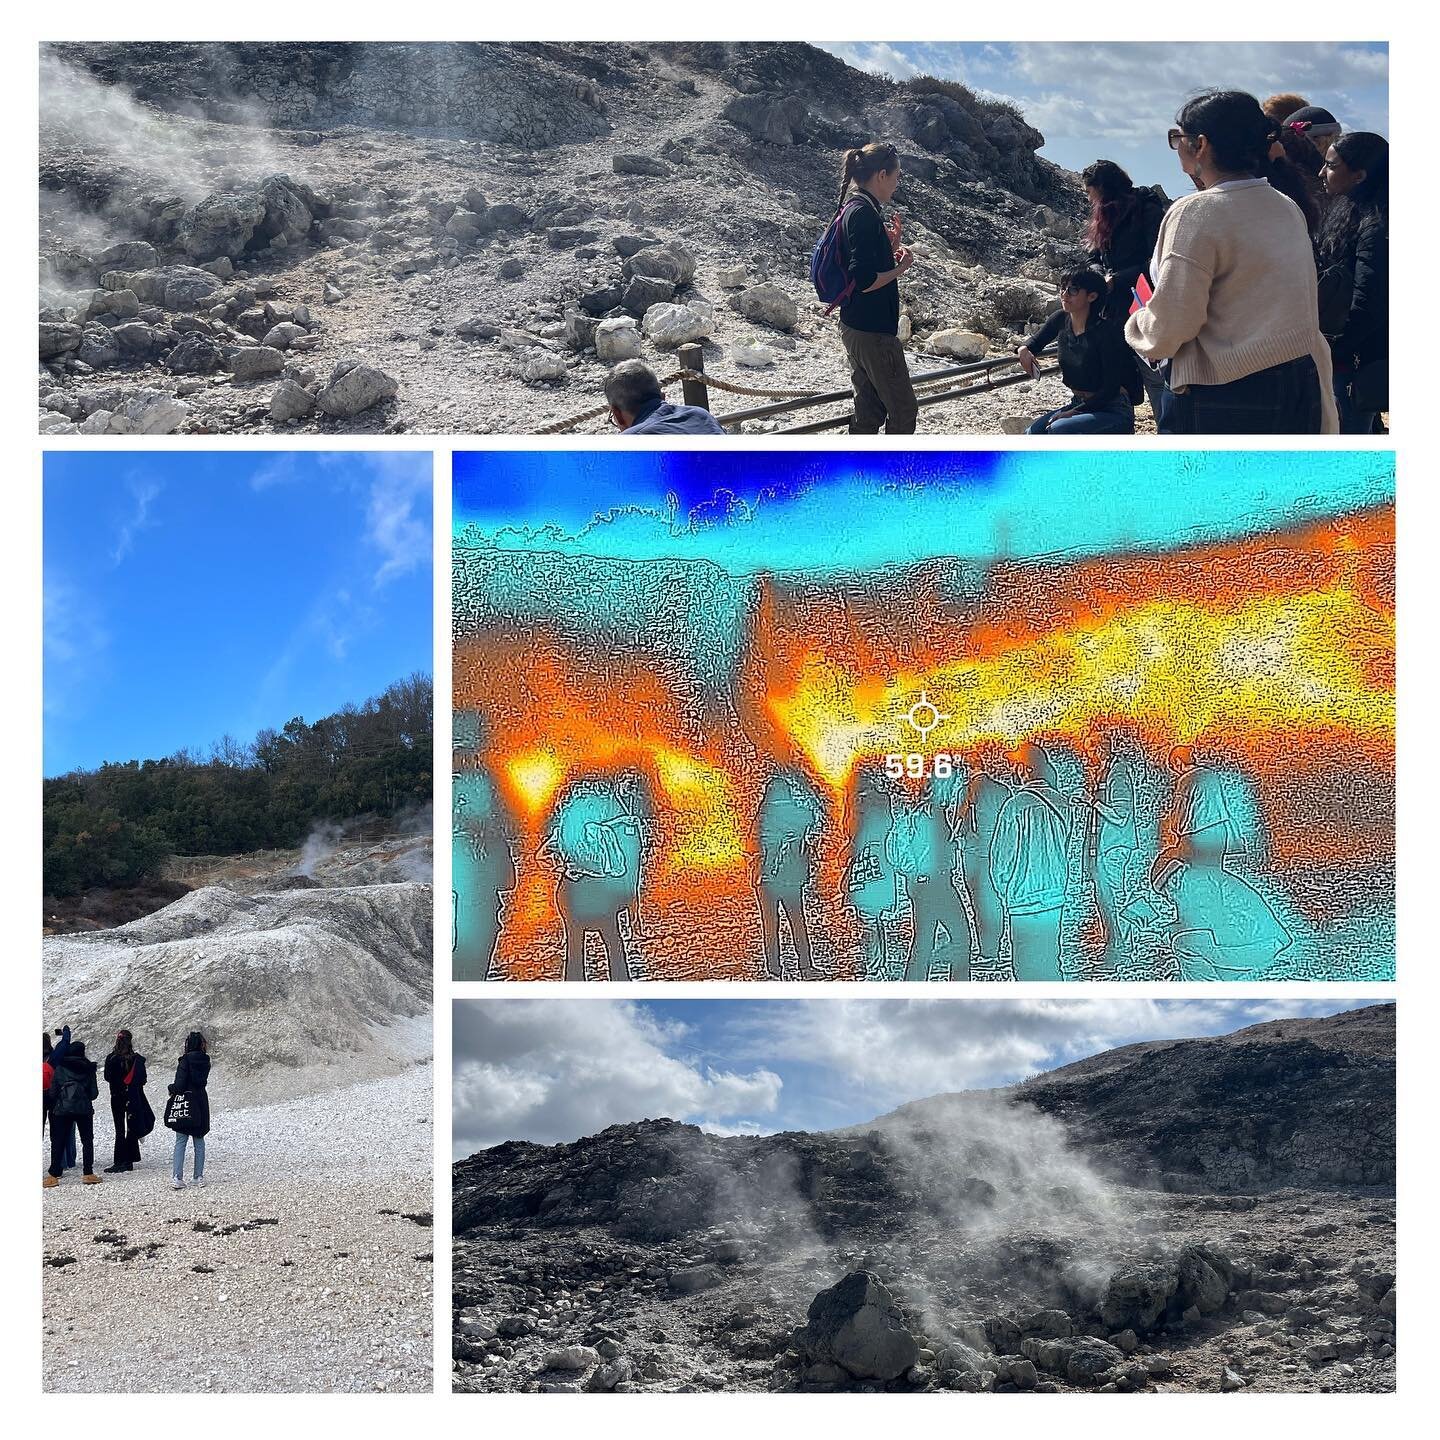 Geothermal Natural Park Biancane in Larderello

Field trip with @bio_id of @bartlettarchucl to Tuscany in March 2023

#geothermal #geothermalenergy #energy #heat #geology #sustainablefuture #extremeenvironments #thermal #study